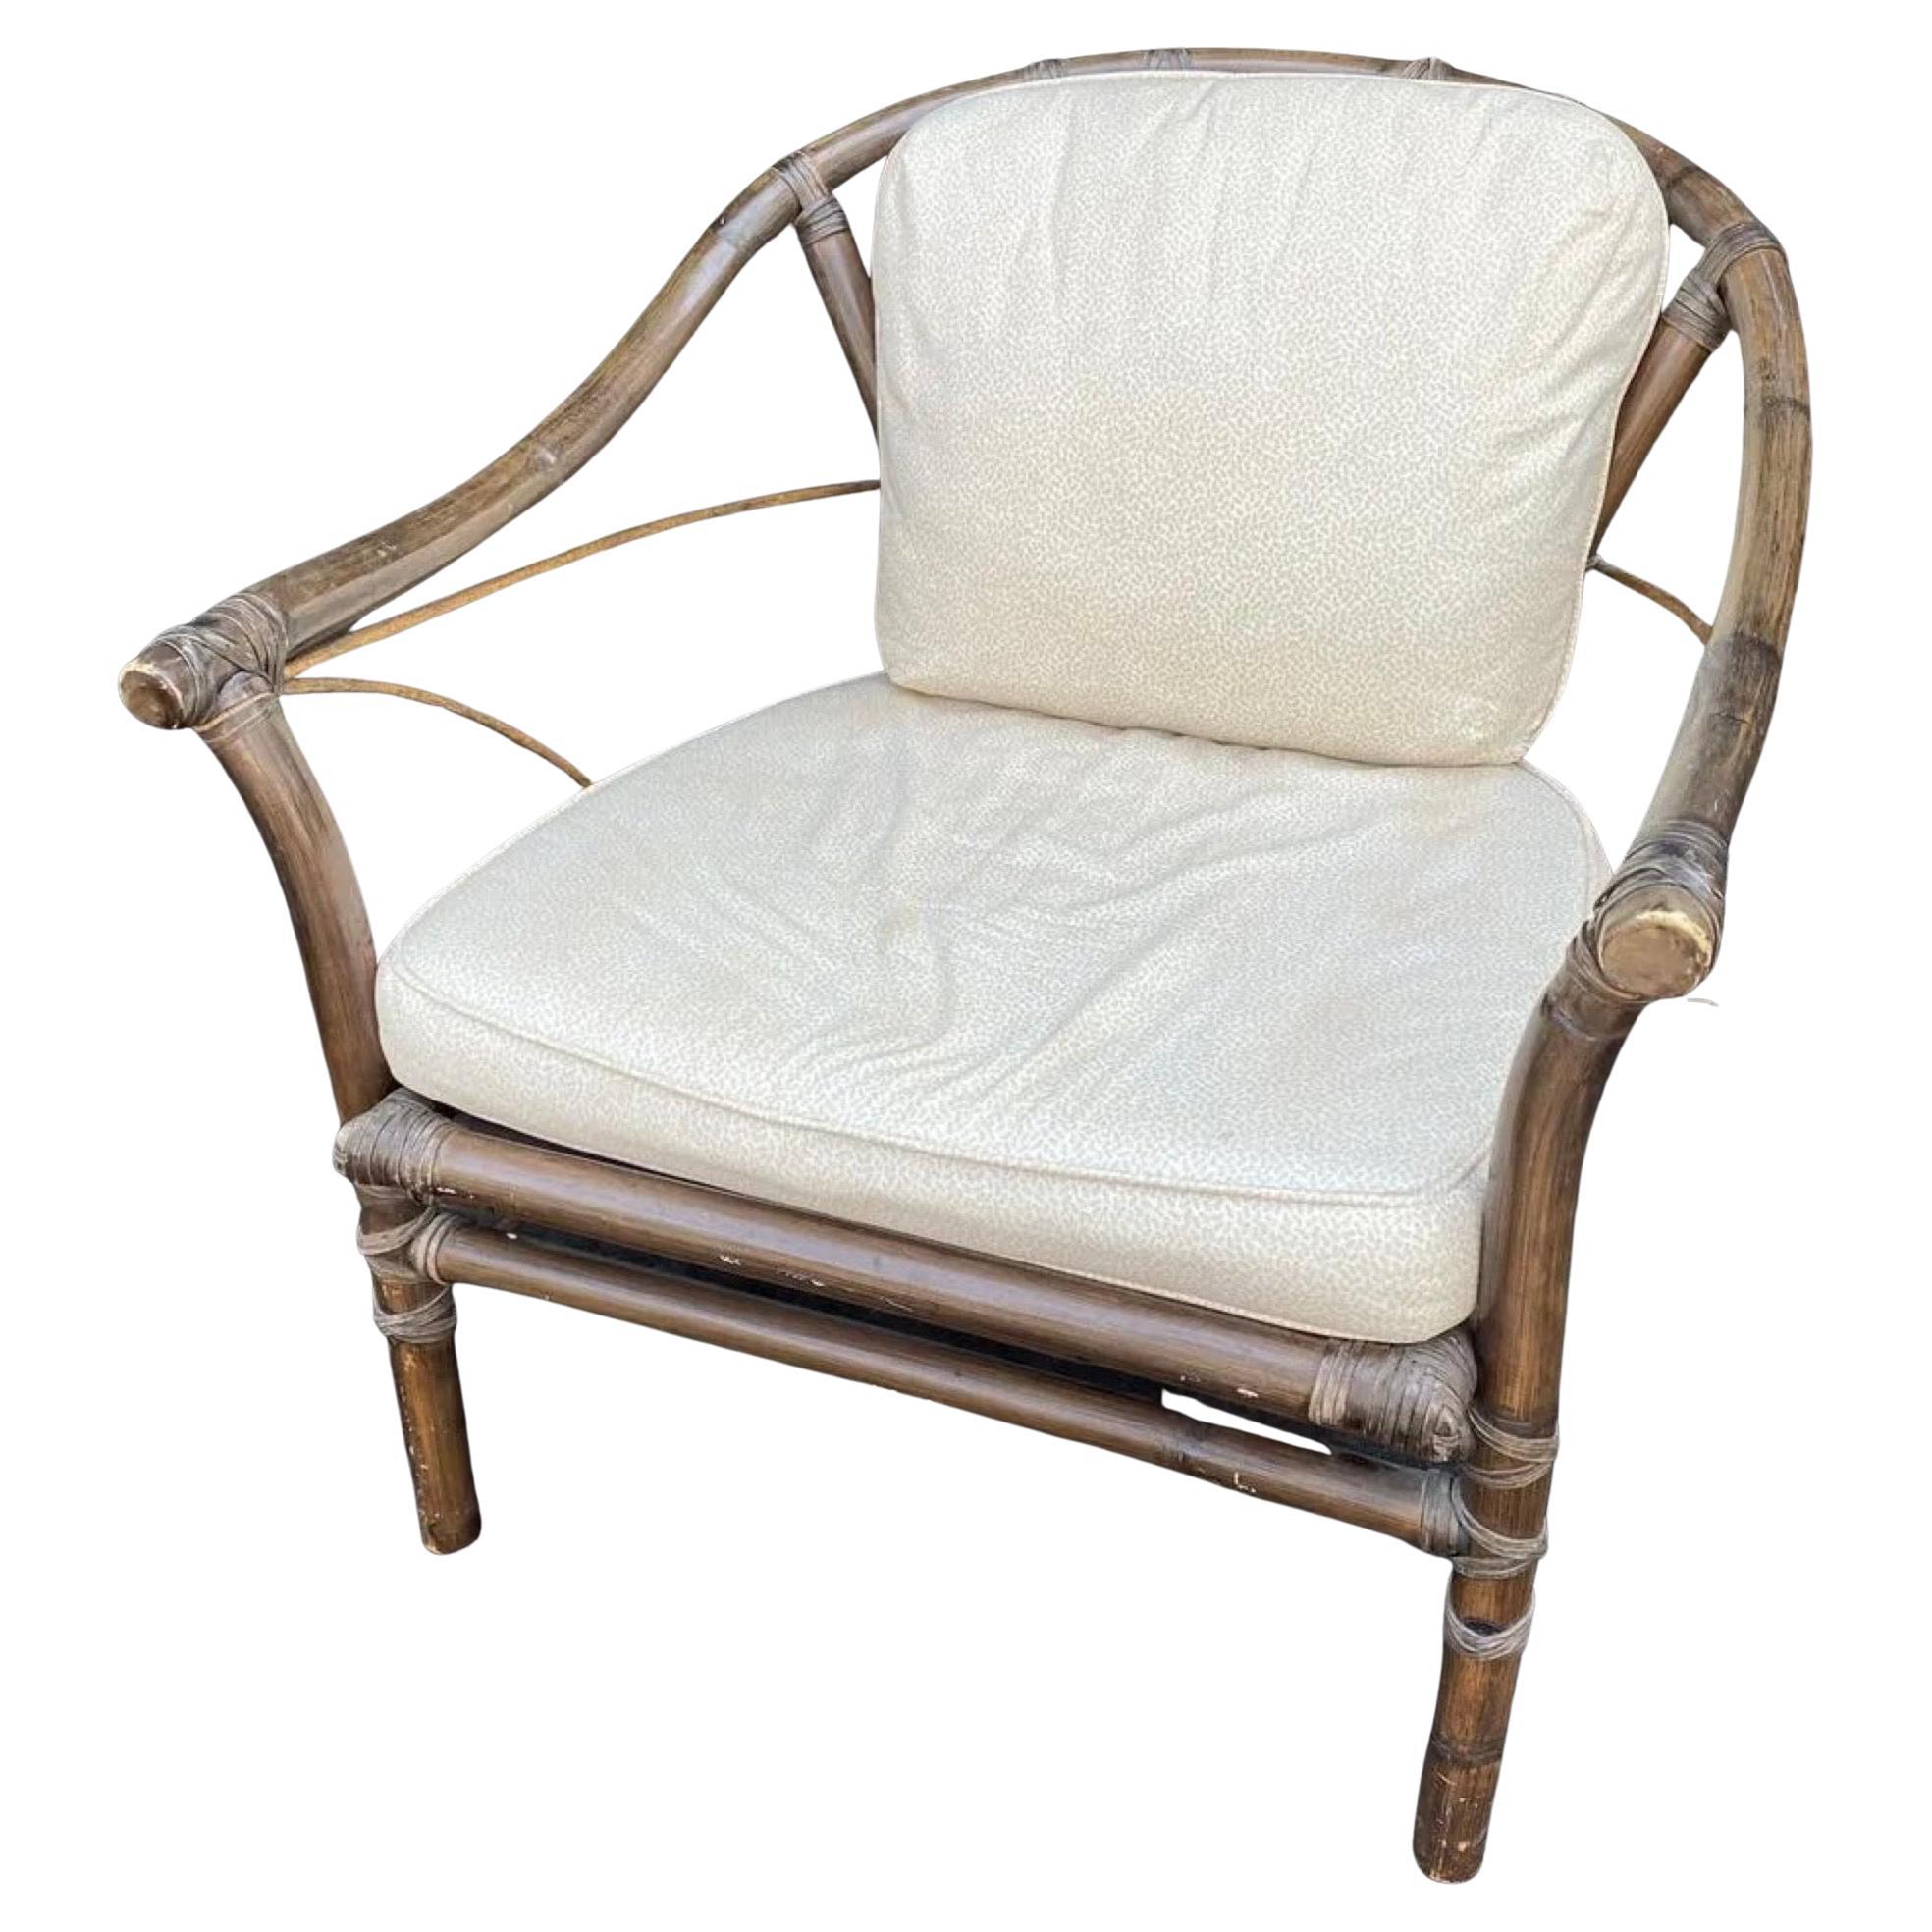 McGuire Hollywood Regency Style Bamboo Rattan Lounge Chair